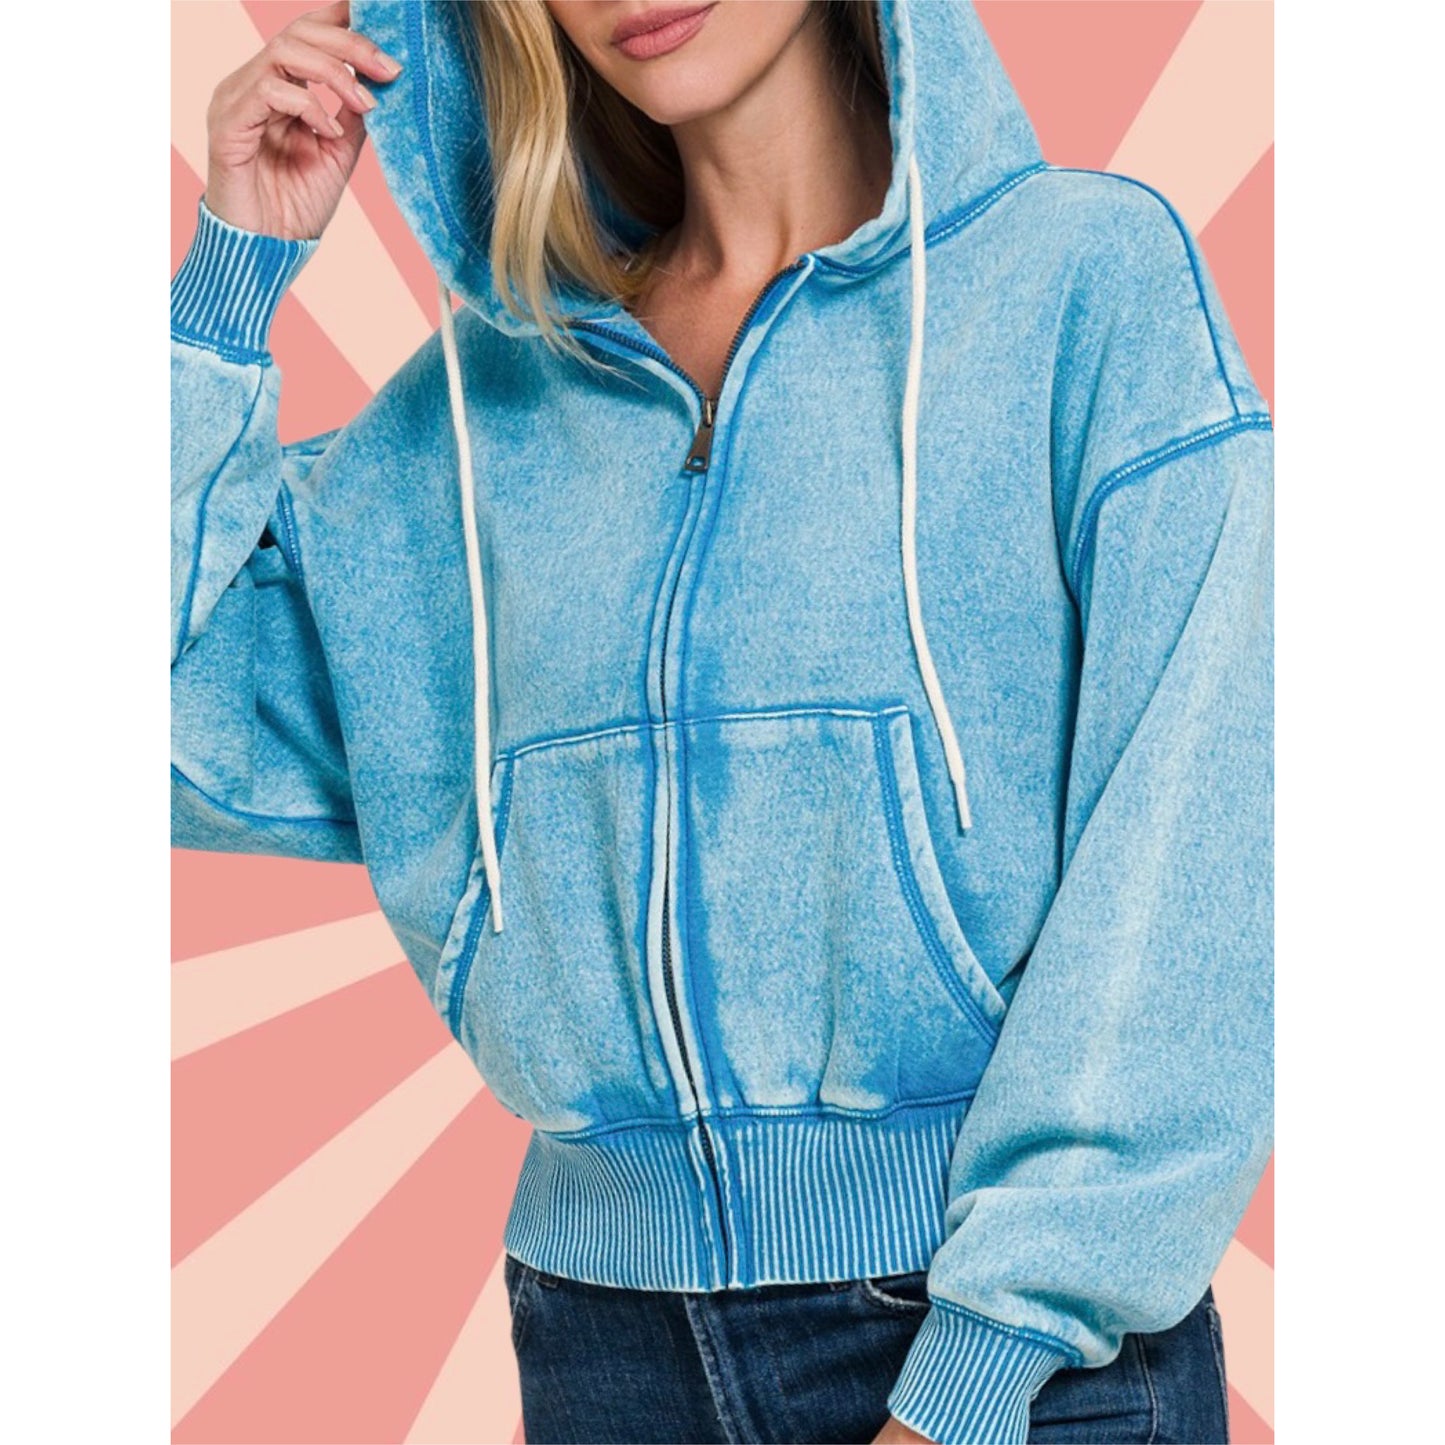 The Courtney Zip Up Hoodie (ready to ship!)